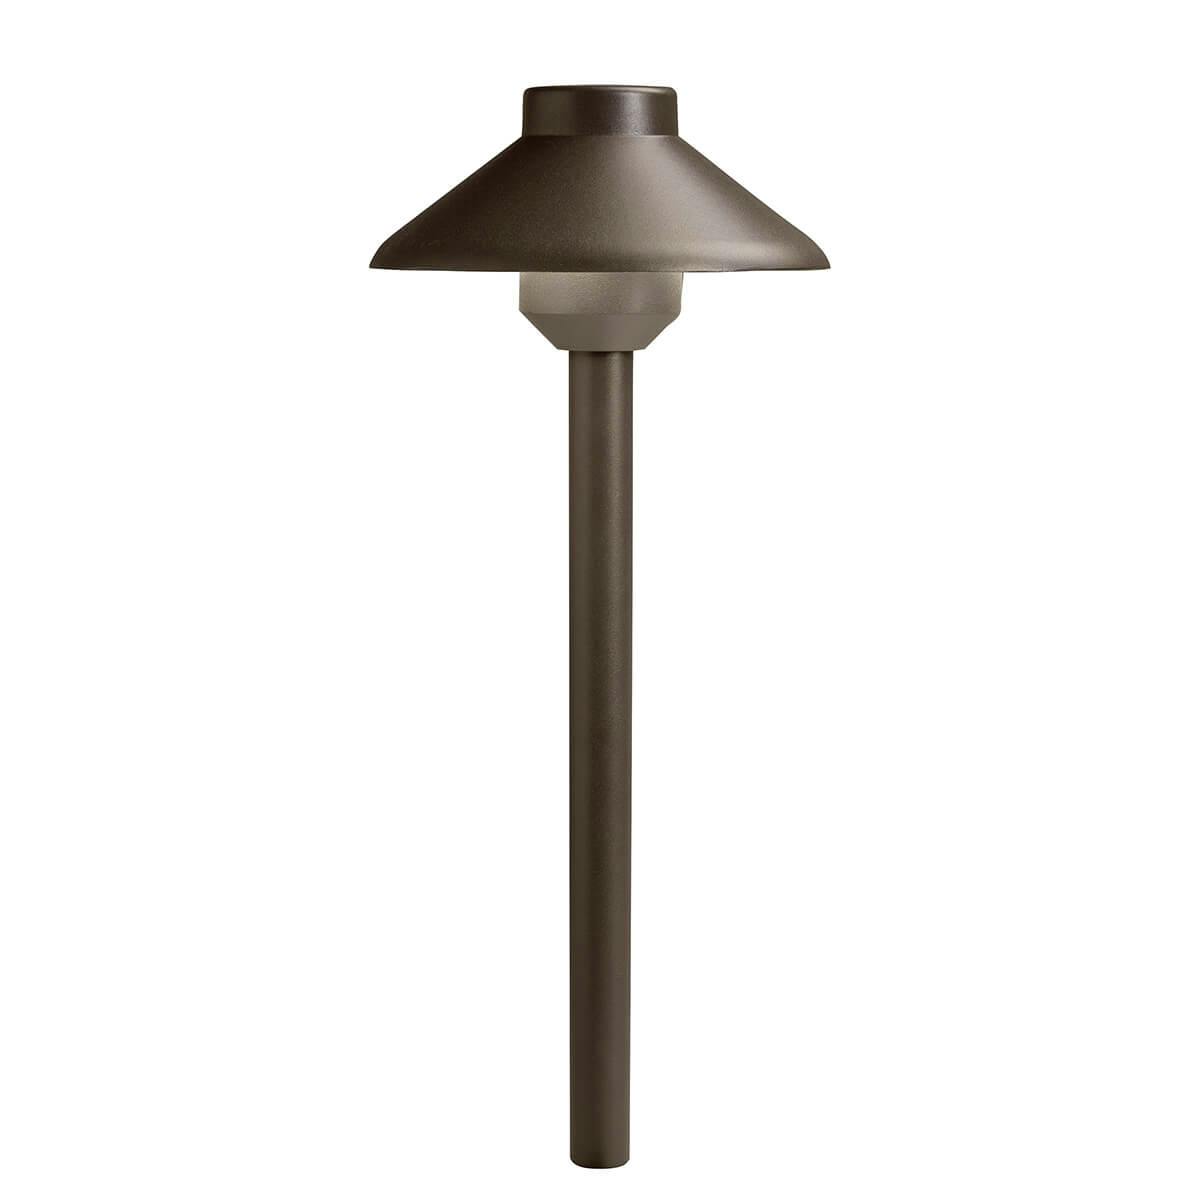 Stepped Dome 12V 2700K Path Light Textured Architectural Bronze on a white background